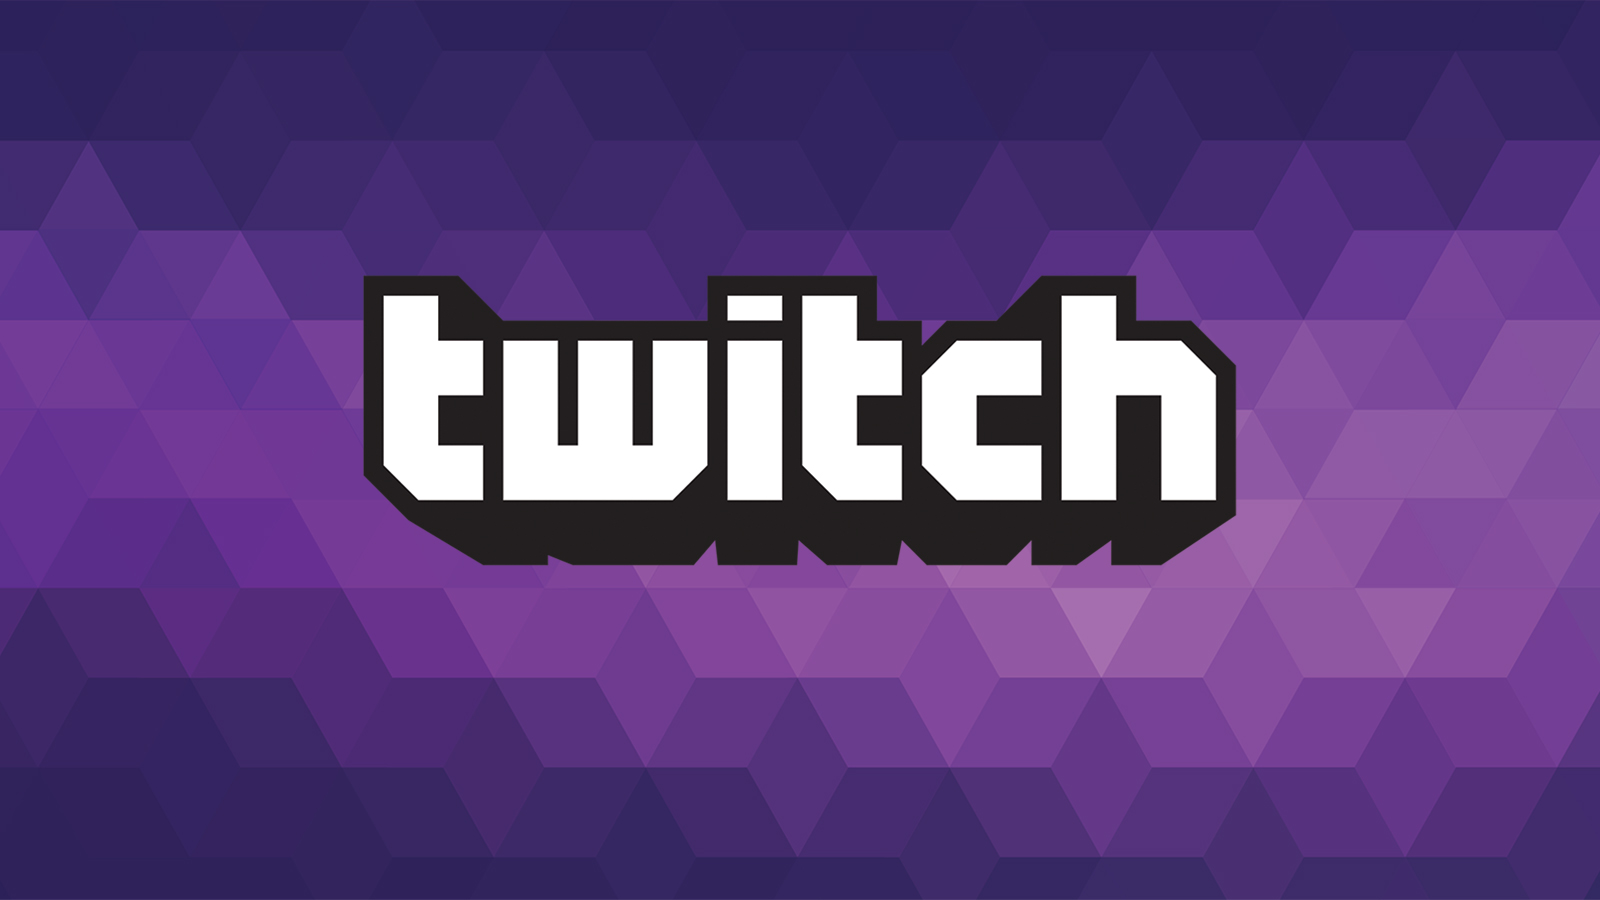 #New changes Coming To The Twitch Partner Program This Summer! » OmniGeekEmpire